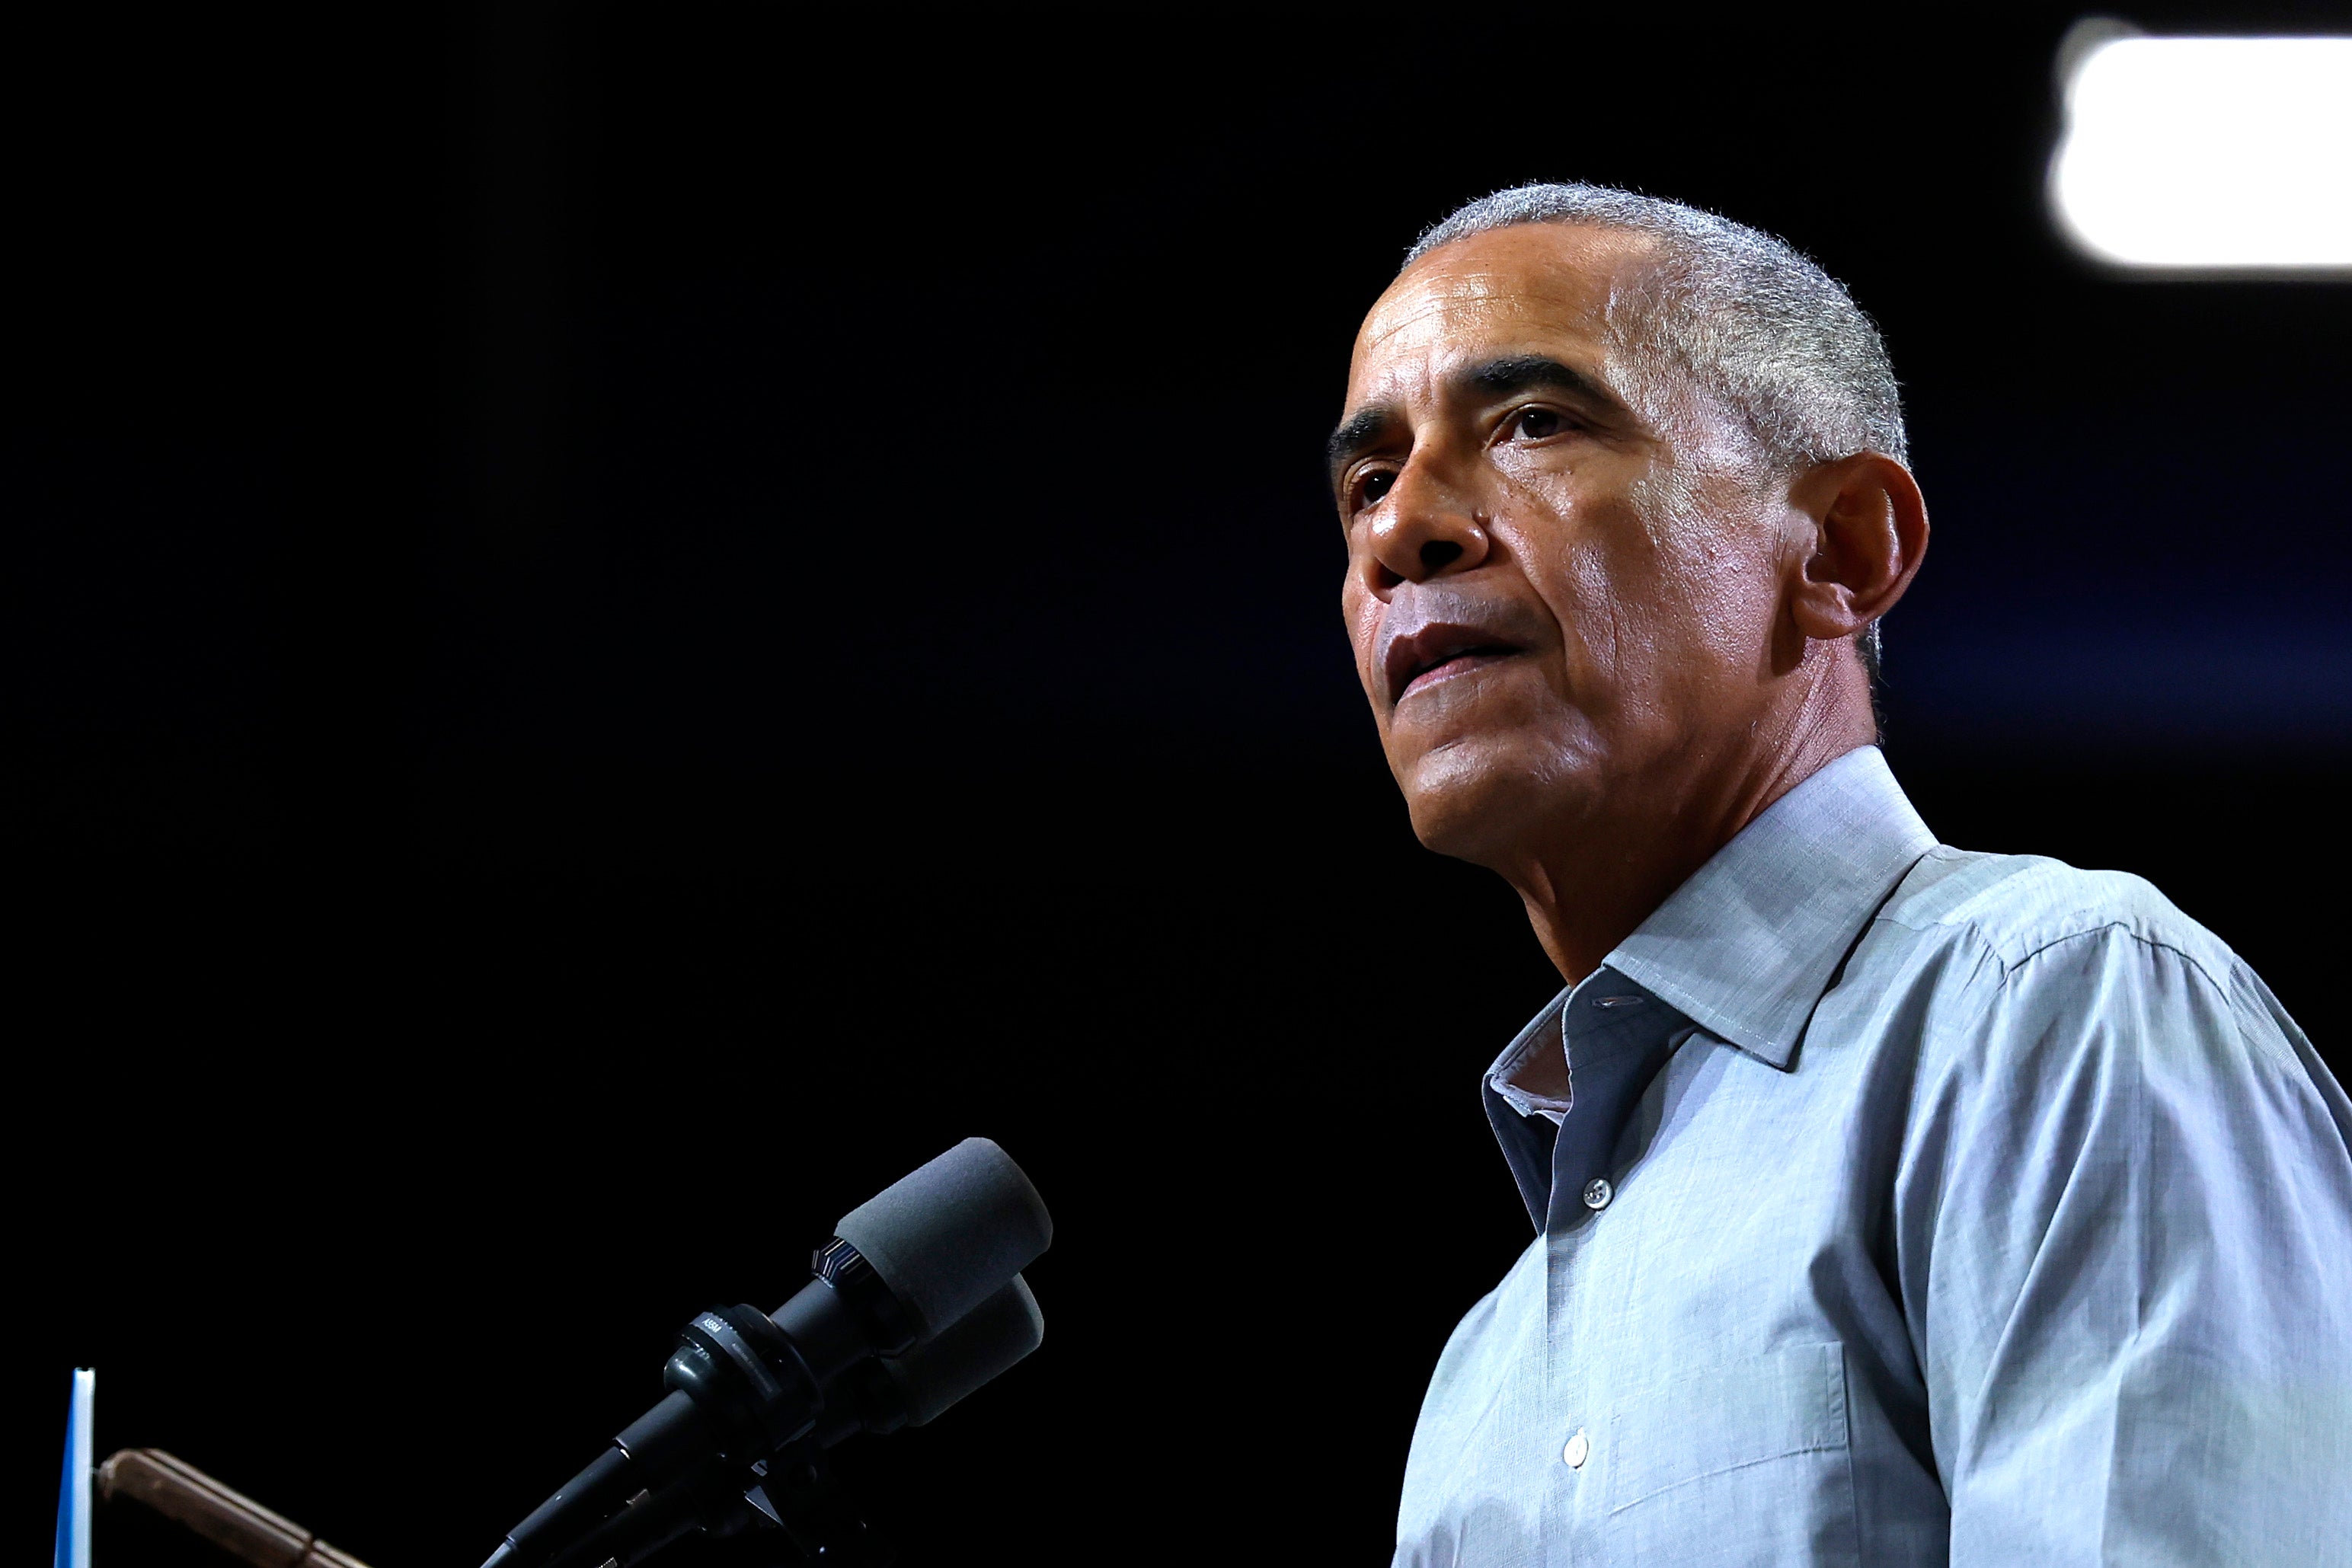 Former President Barack Obama speaks at a campaign rally in support of Nevada Democrats at Cheyenne High School on 1 November 2022